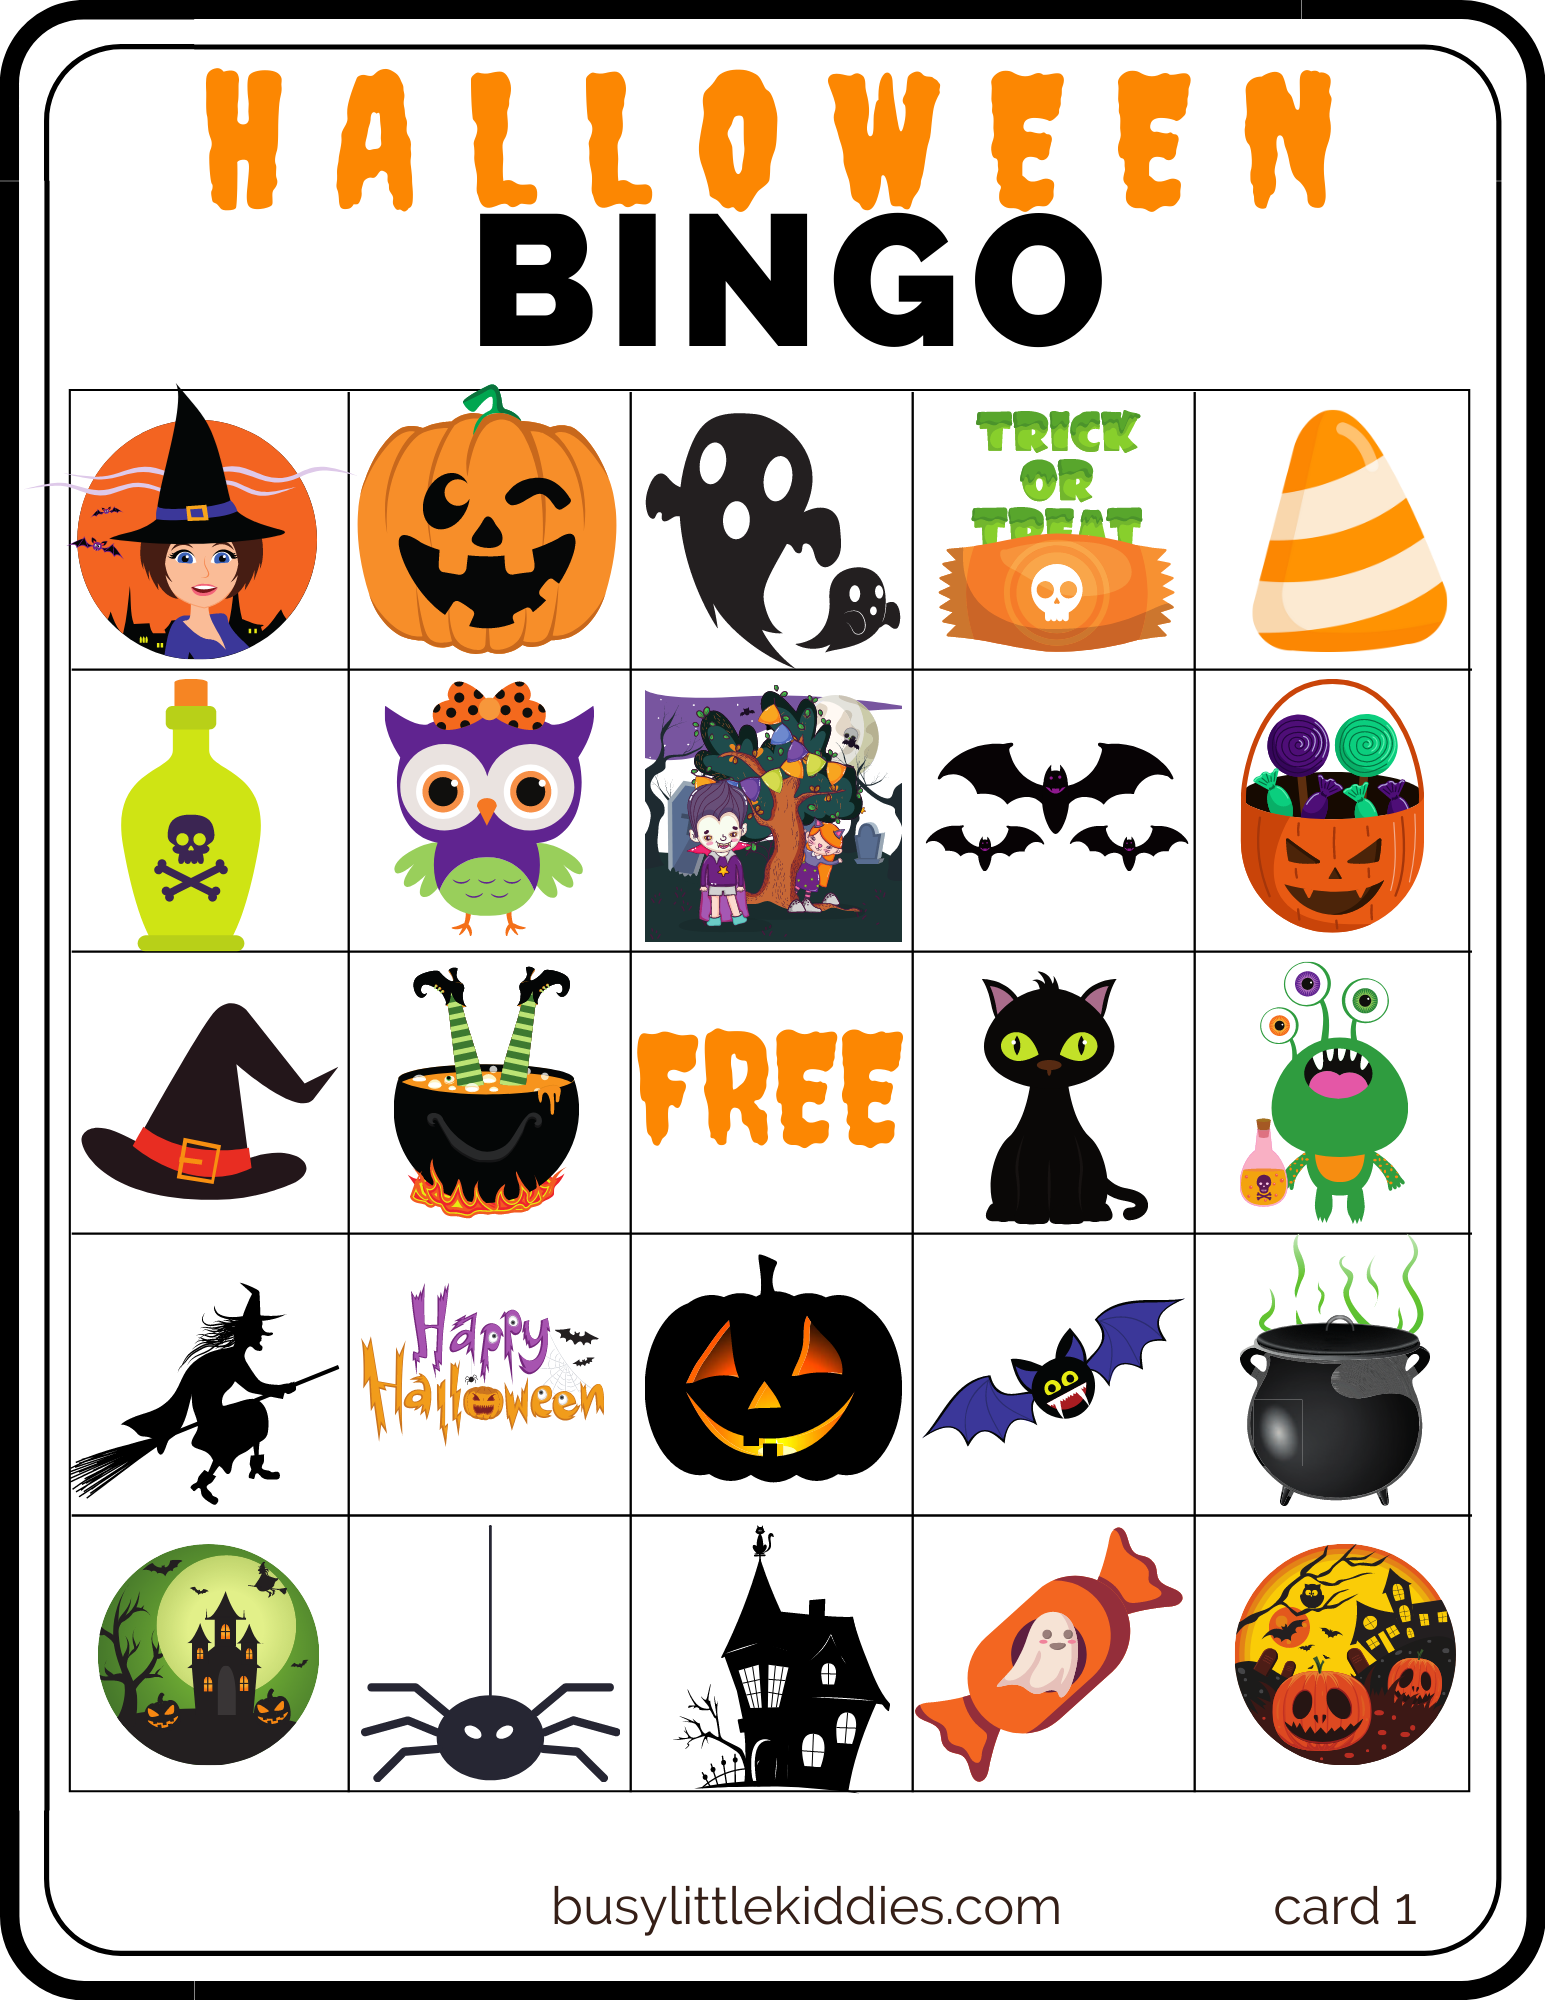 Halloween Bingo Free Printable With Pictures 4 Players Busy Little 